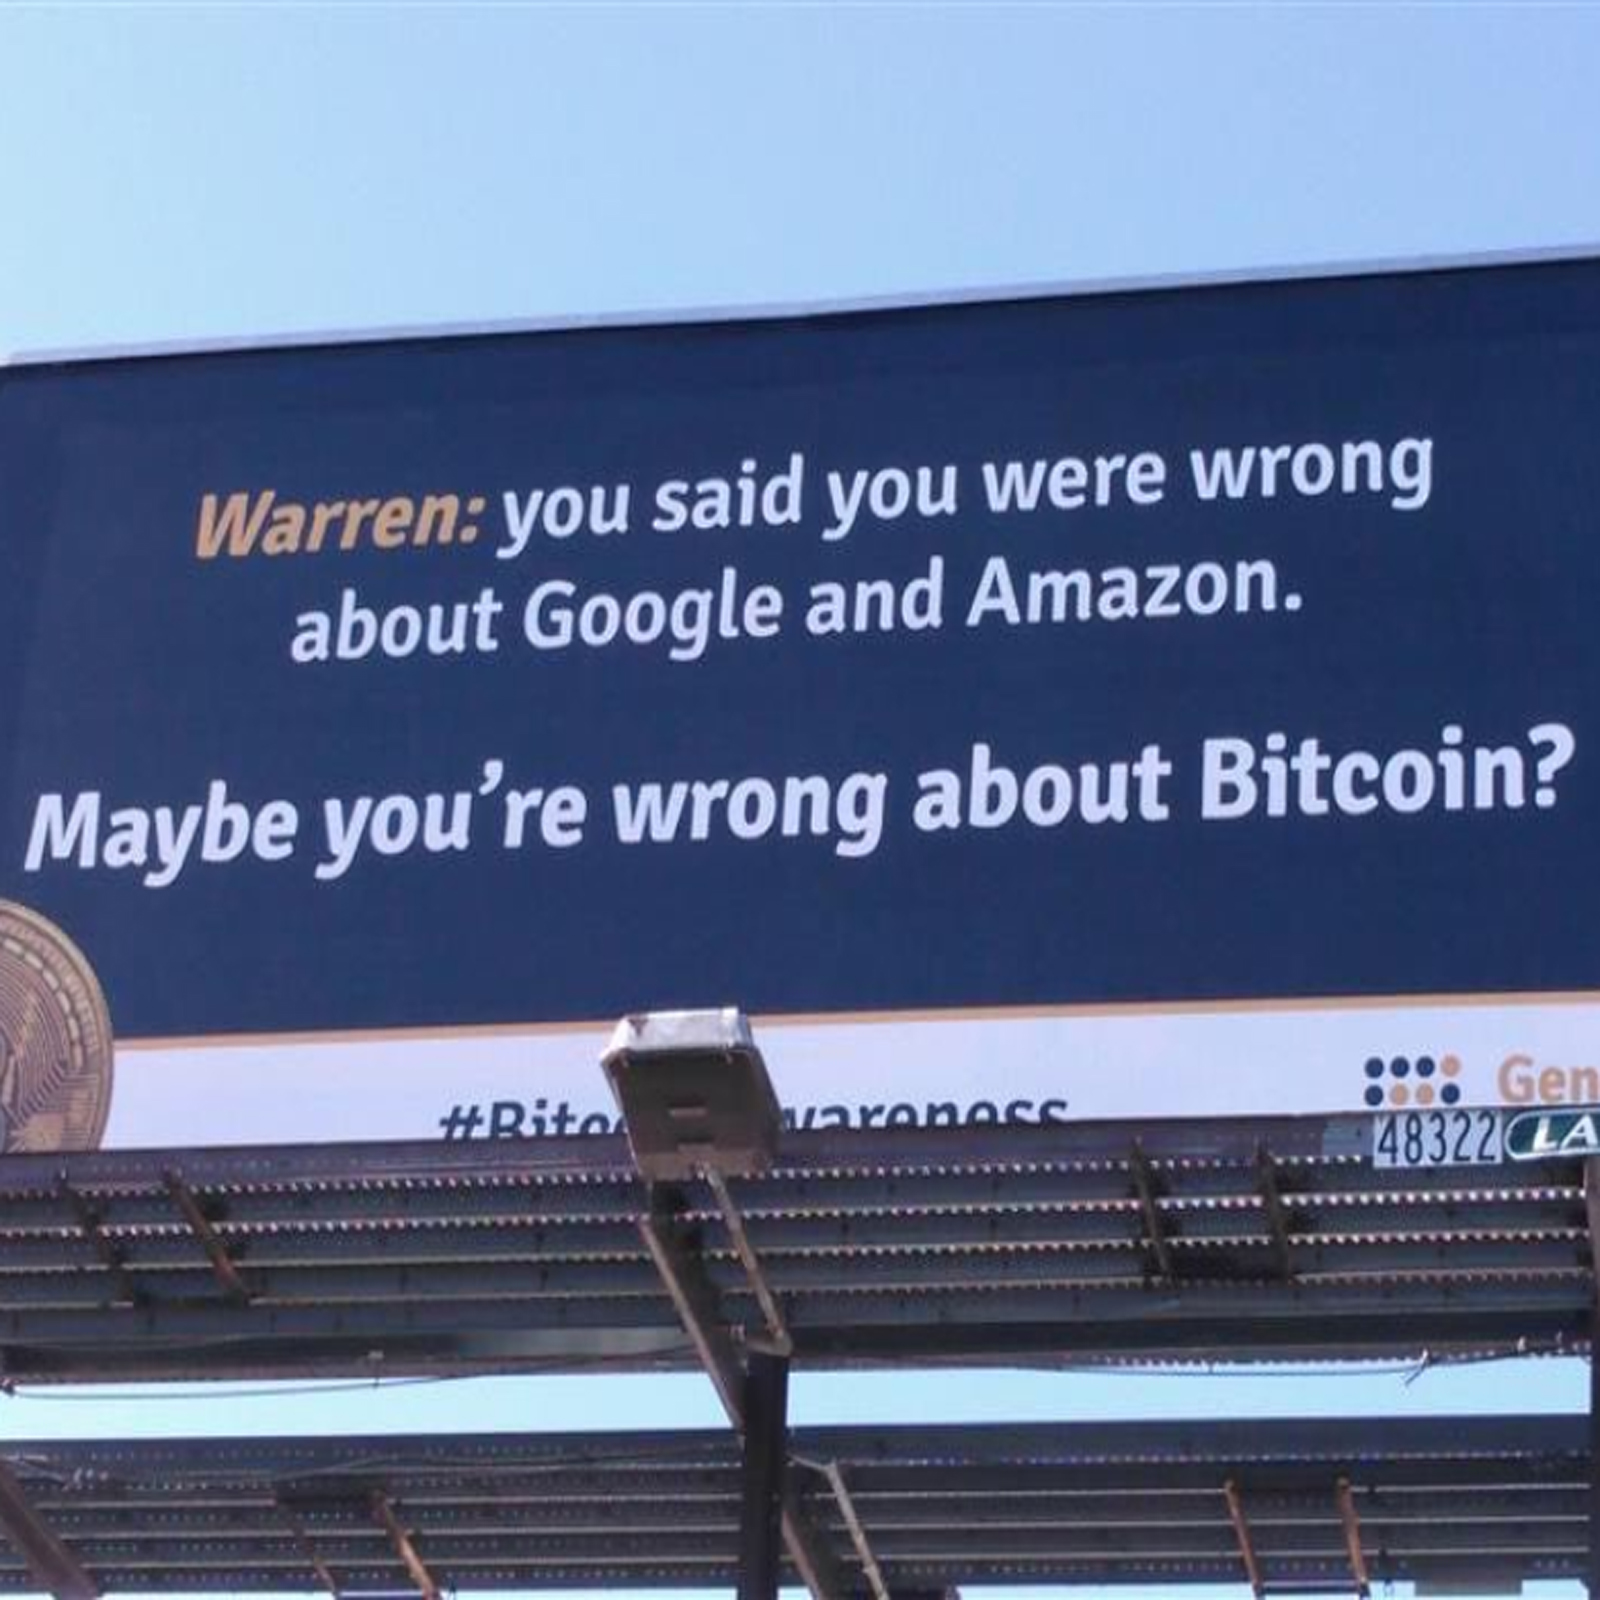 Bitcoin in Brief Saturday: Warren Warned By Billboards, Coinbase Tempted by Banking